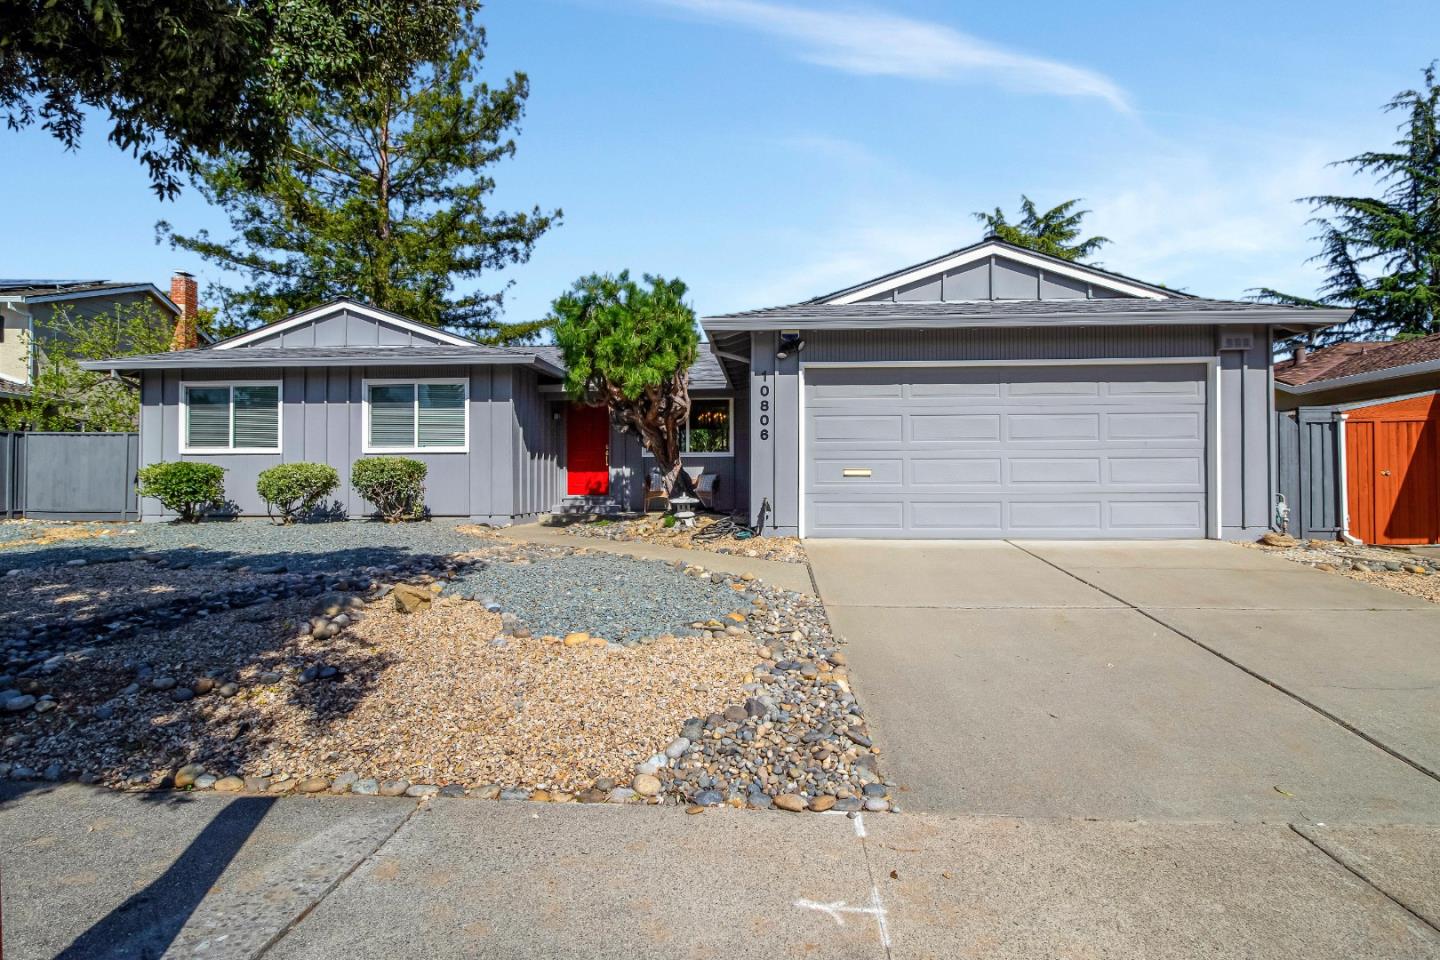 Photo of 10806 Cranberry Dr in Cupertino, CA